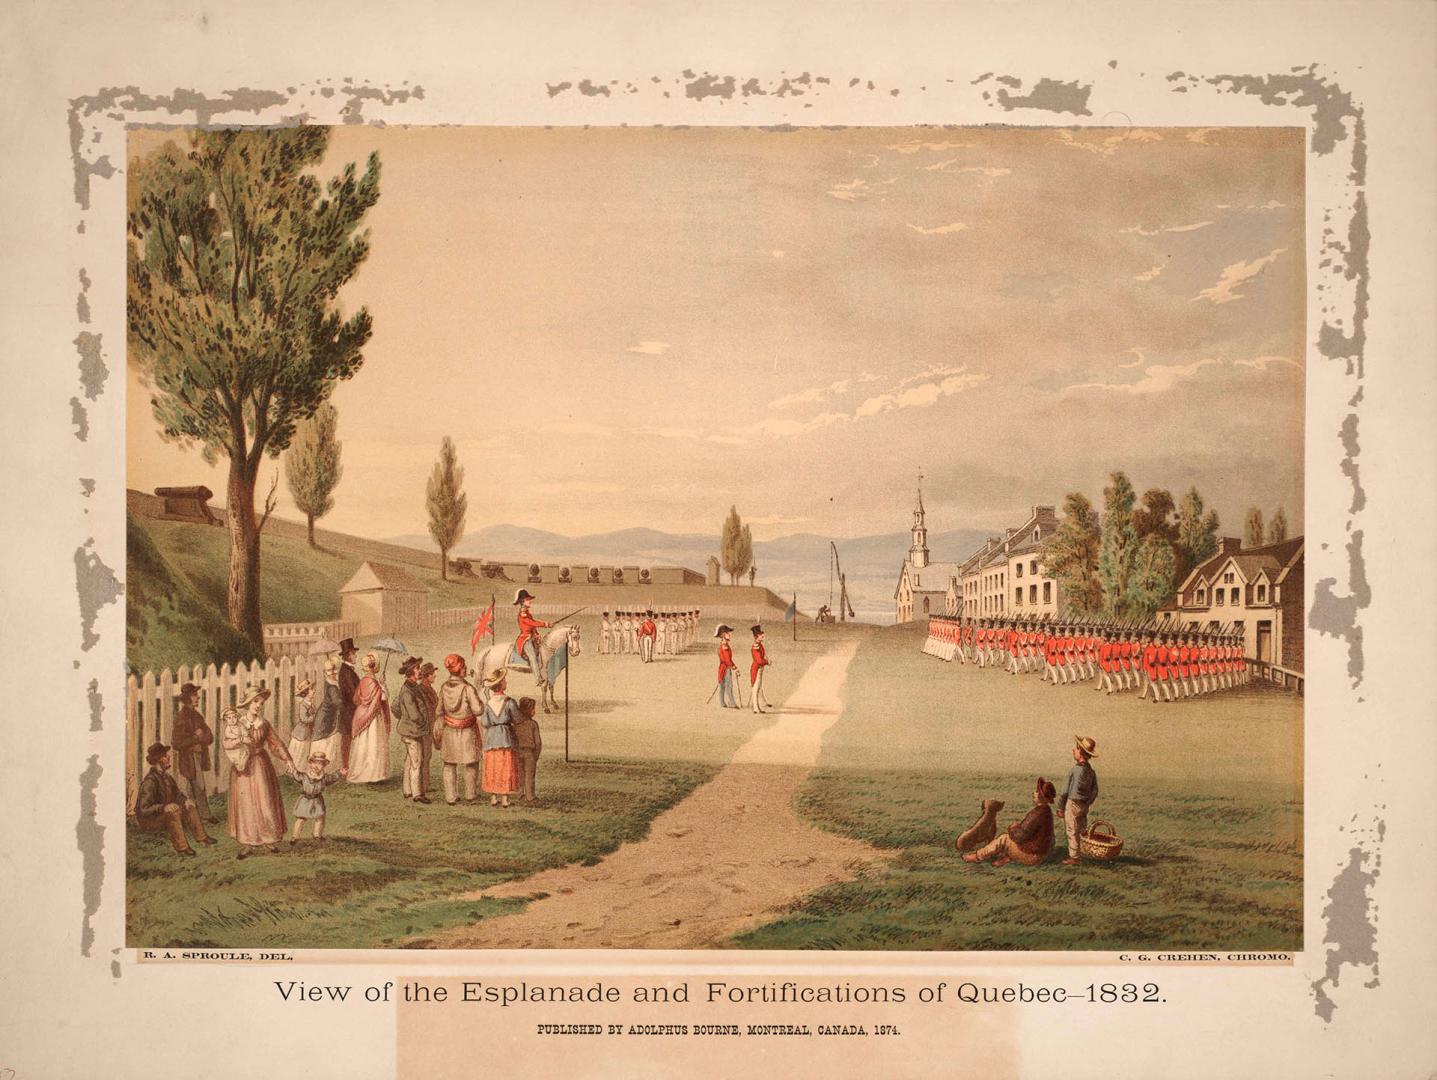 View of the Esplanade and Fortifications of Quebec - 1832